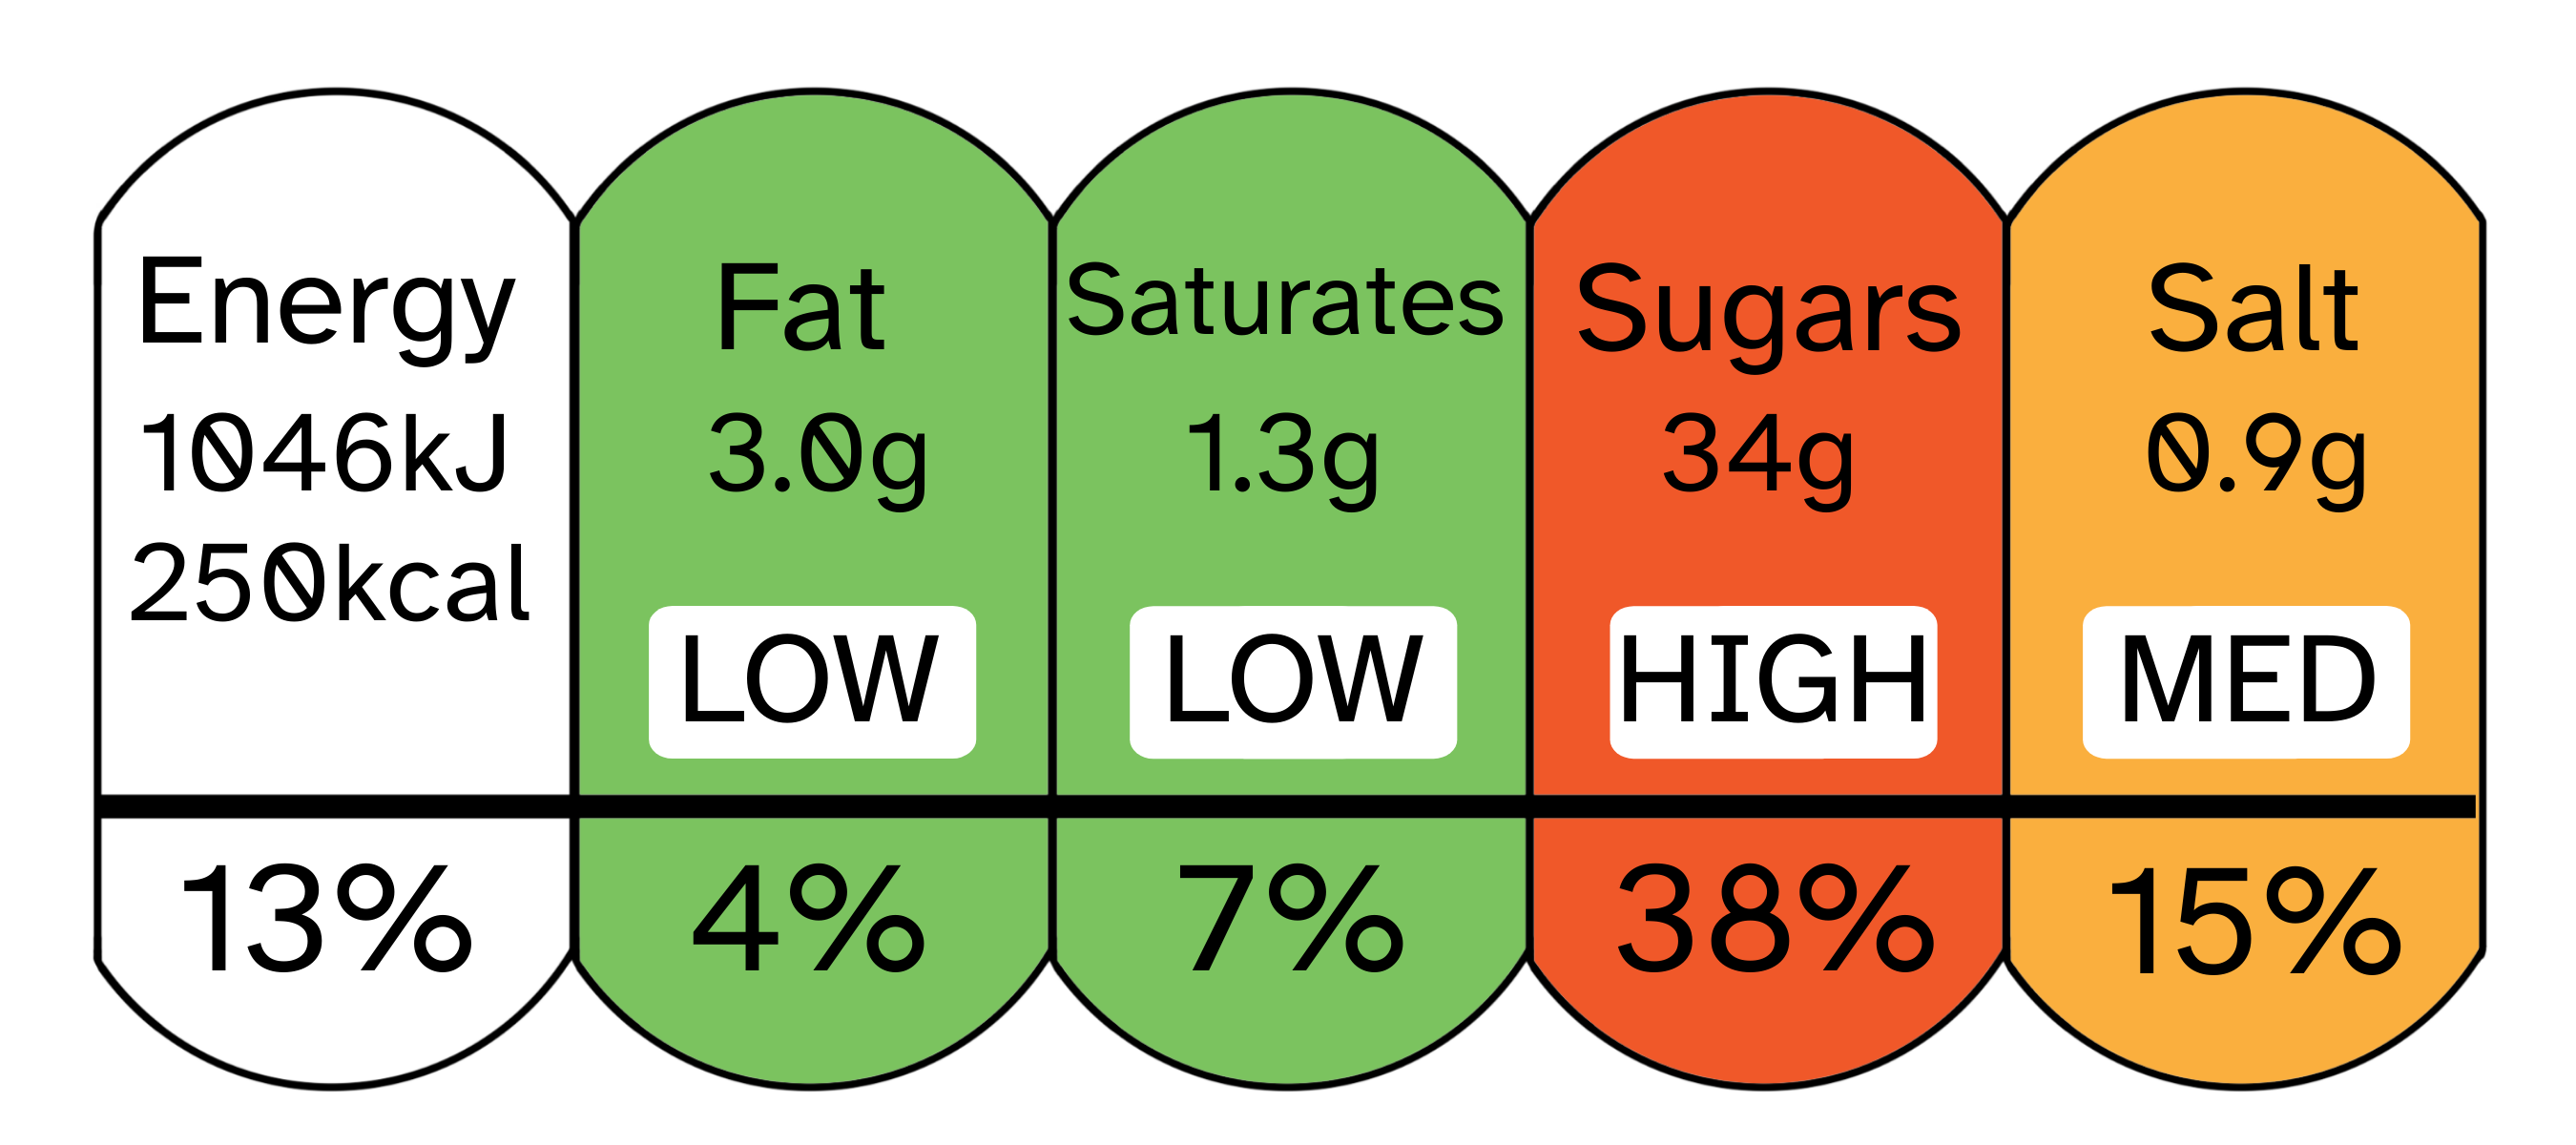 Food label showing 250kcal. 3.0g of fat highlighted in green and 1.3g of saturates also highlighted in green. 34g of sugar highlighted in red. 0.9 grams of salt highlighted in orange. 